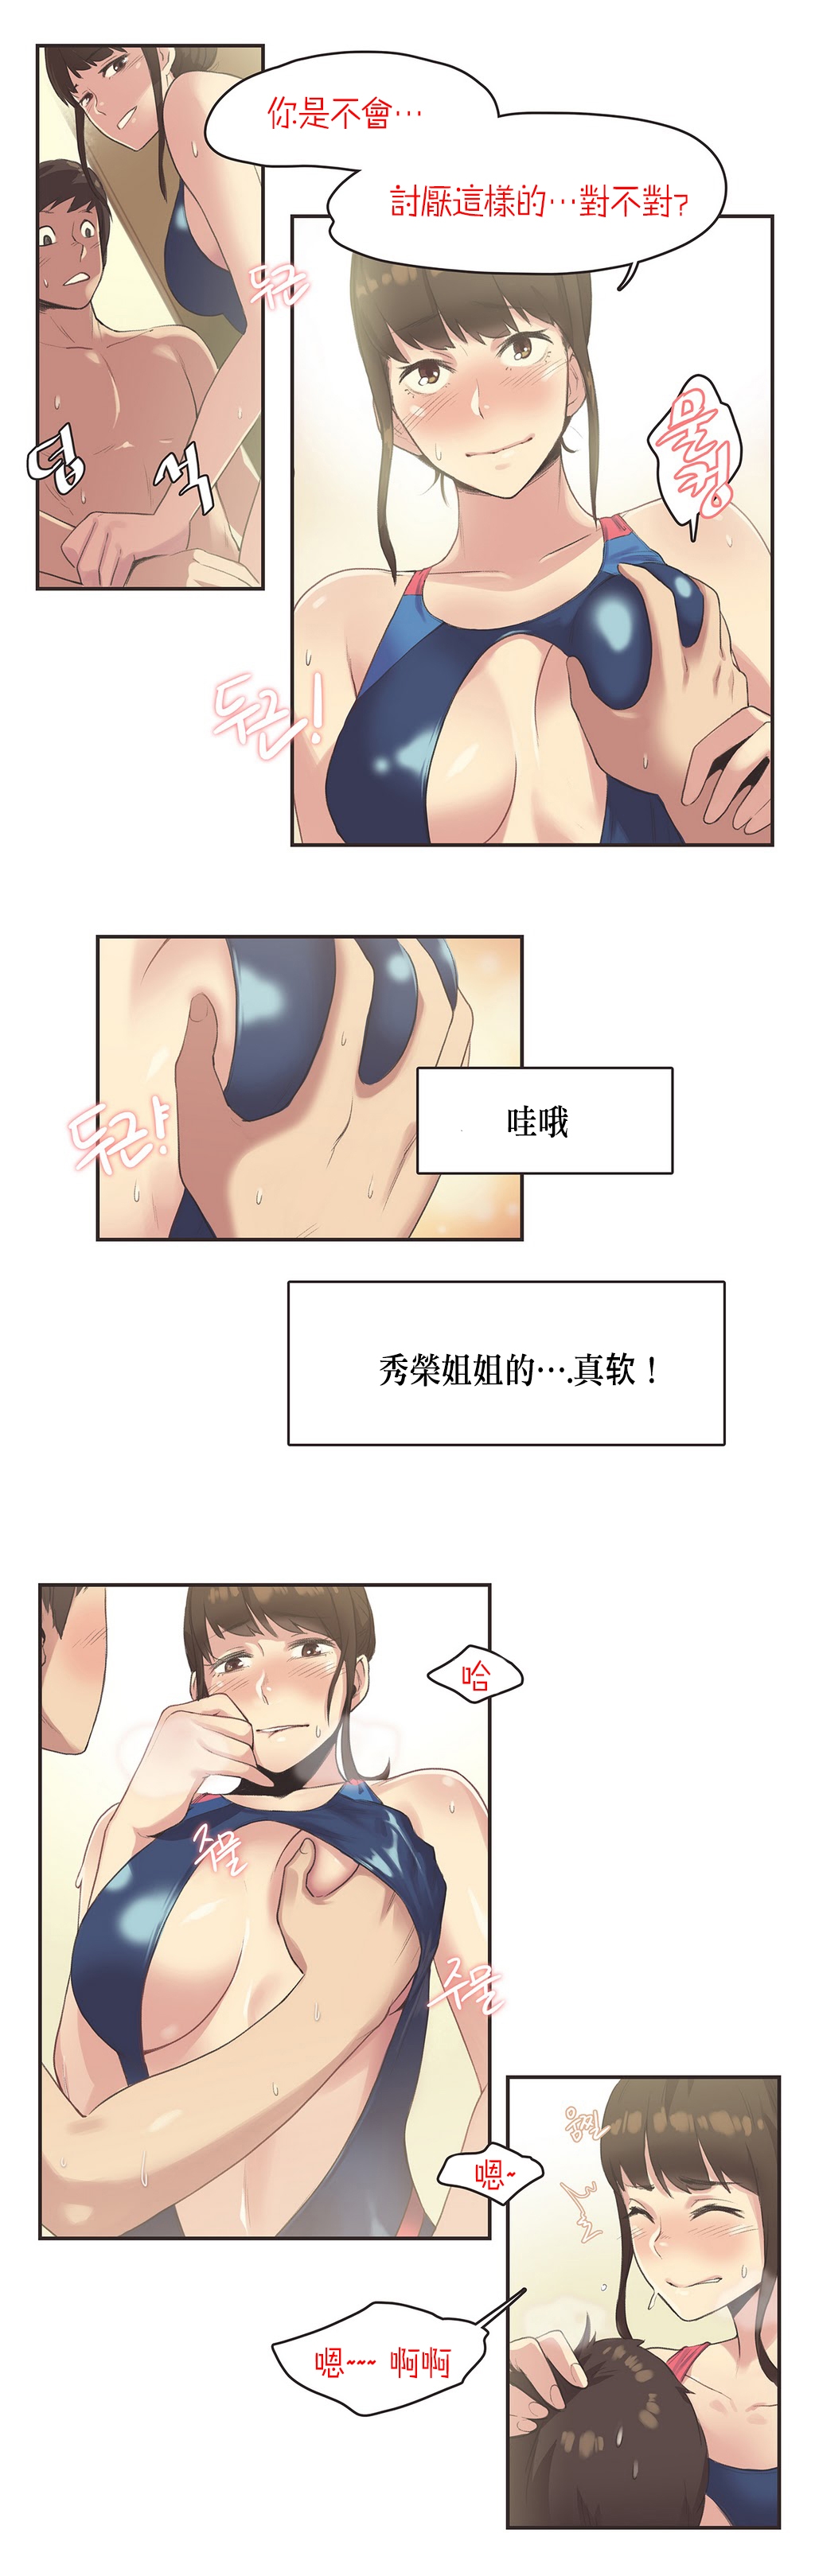 [Gamang] Sports Girl Ch.7 [Chinese] [高麗個人漢化] 8